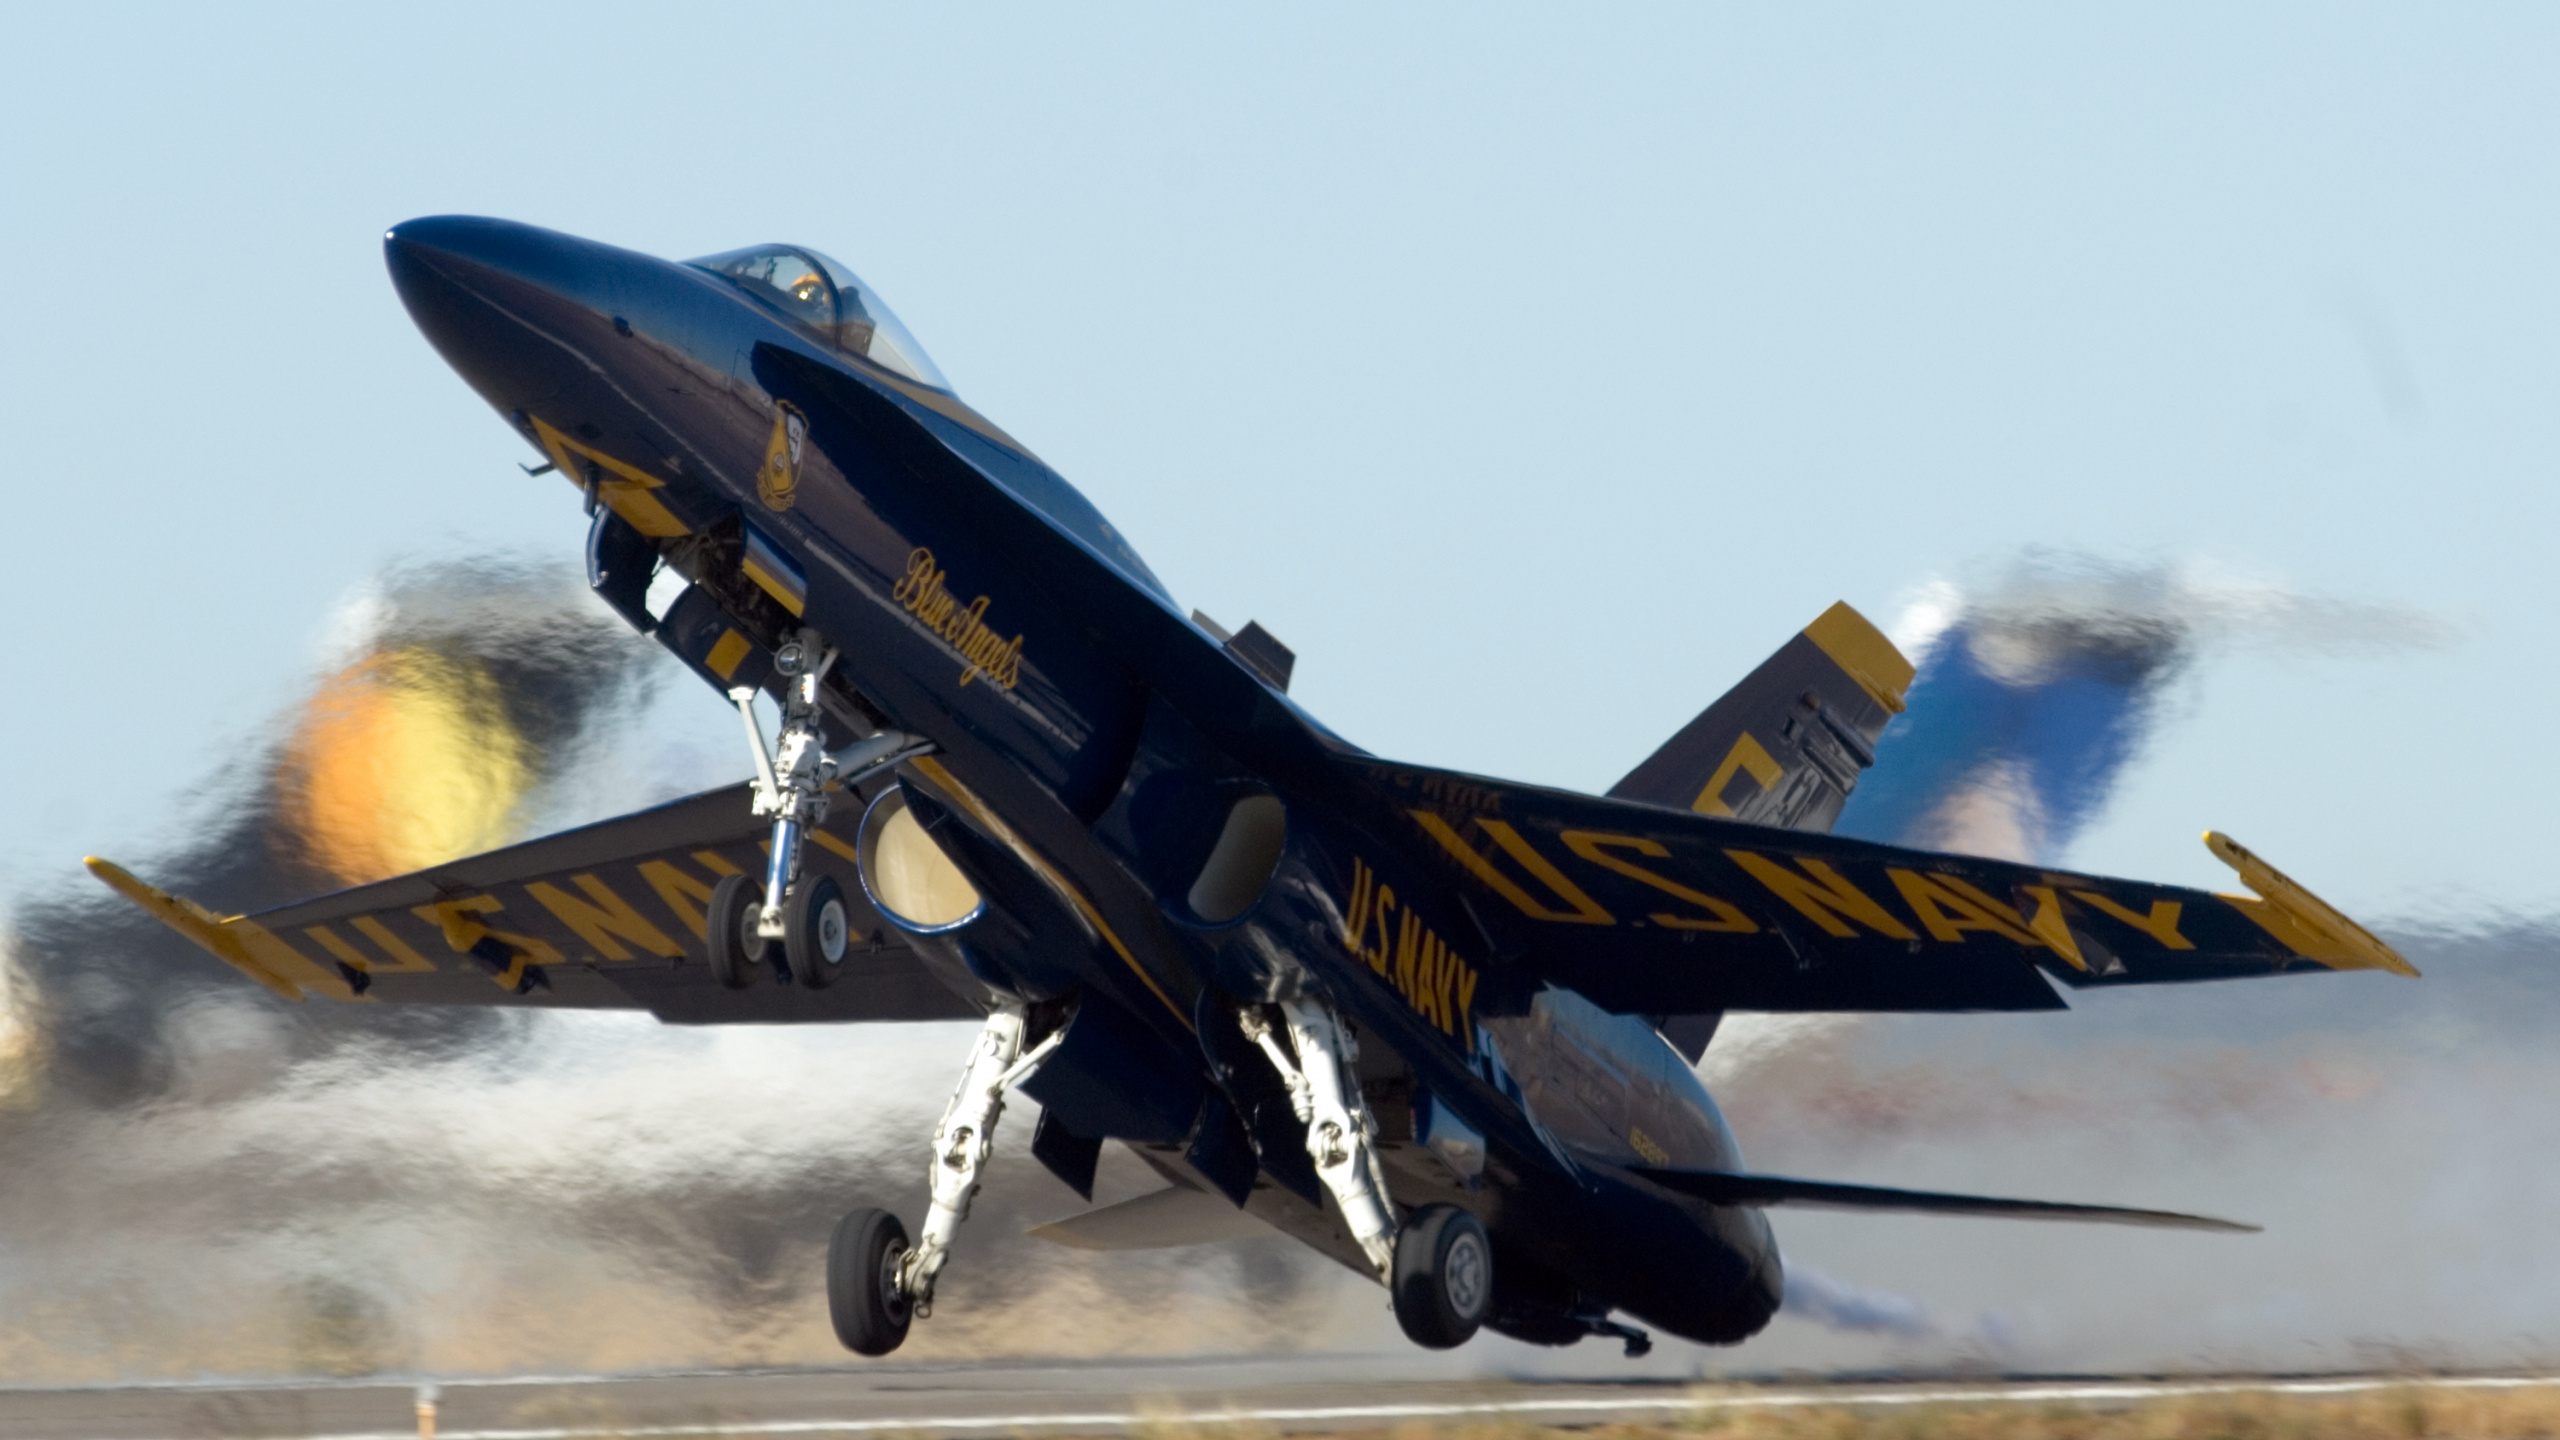 Black and Yellow Fighter Plane on The Field. Wallpaper in 2560x1440 Resolution